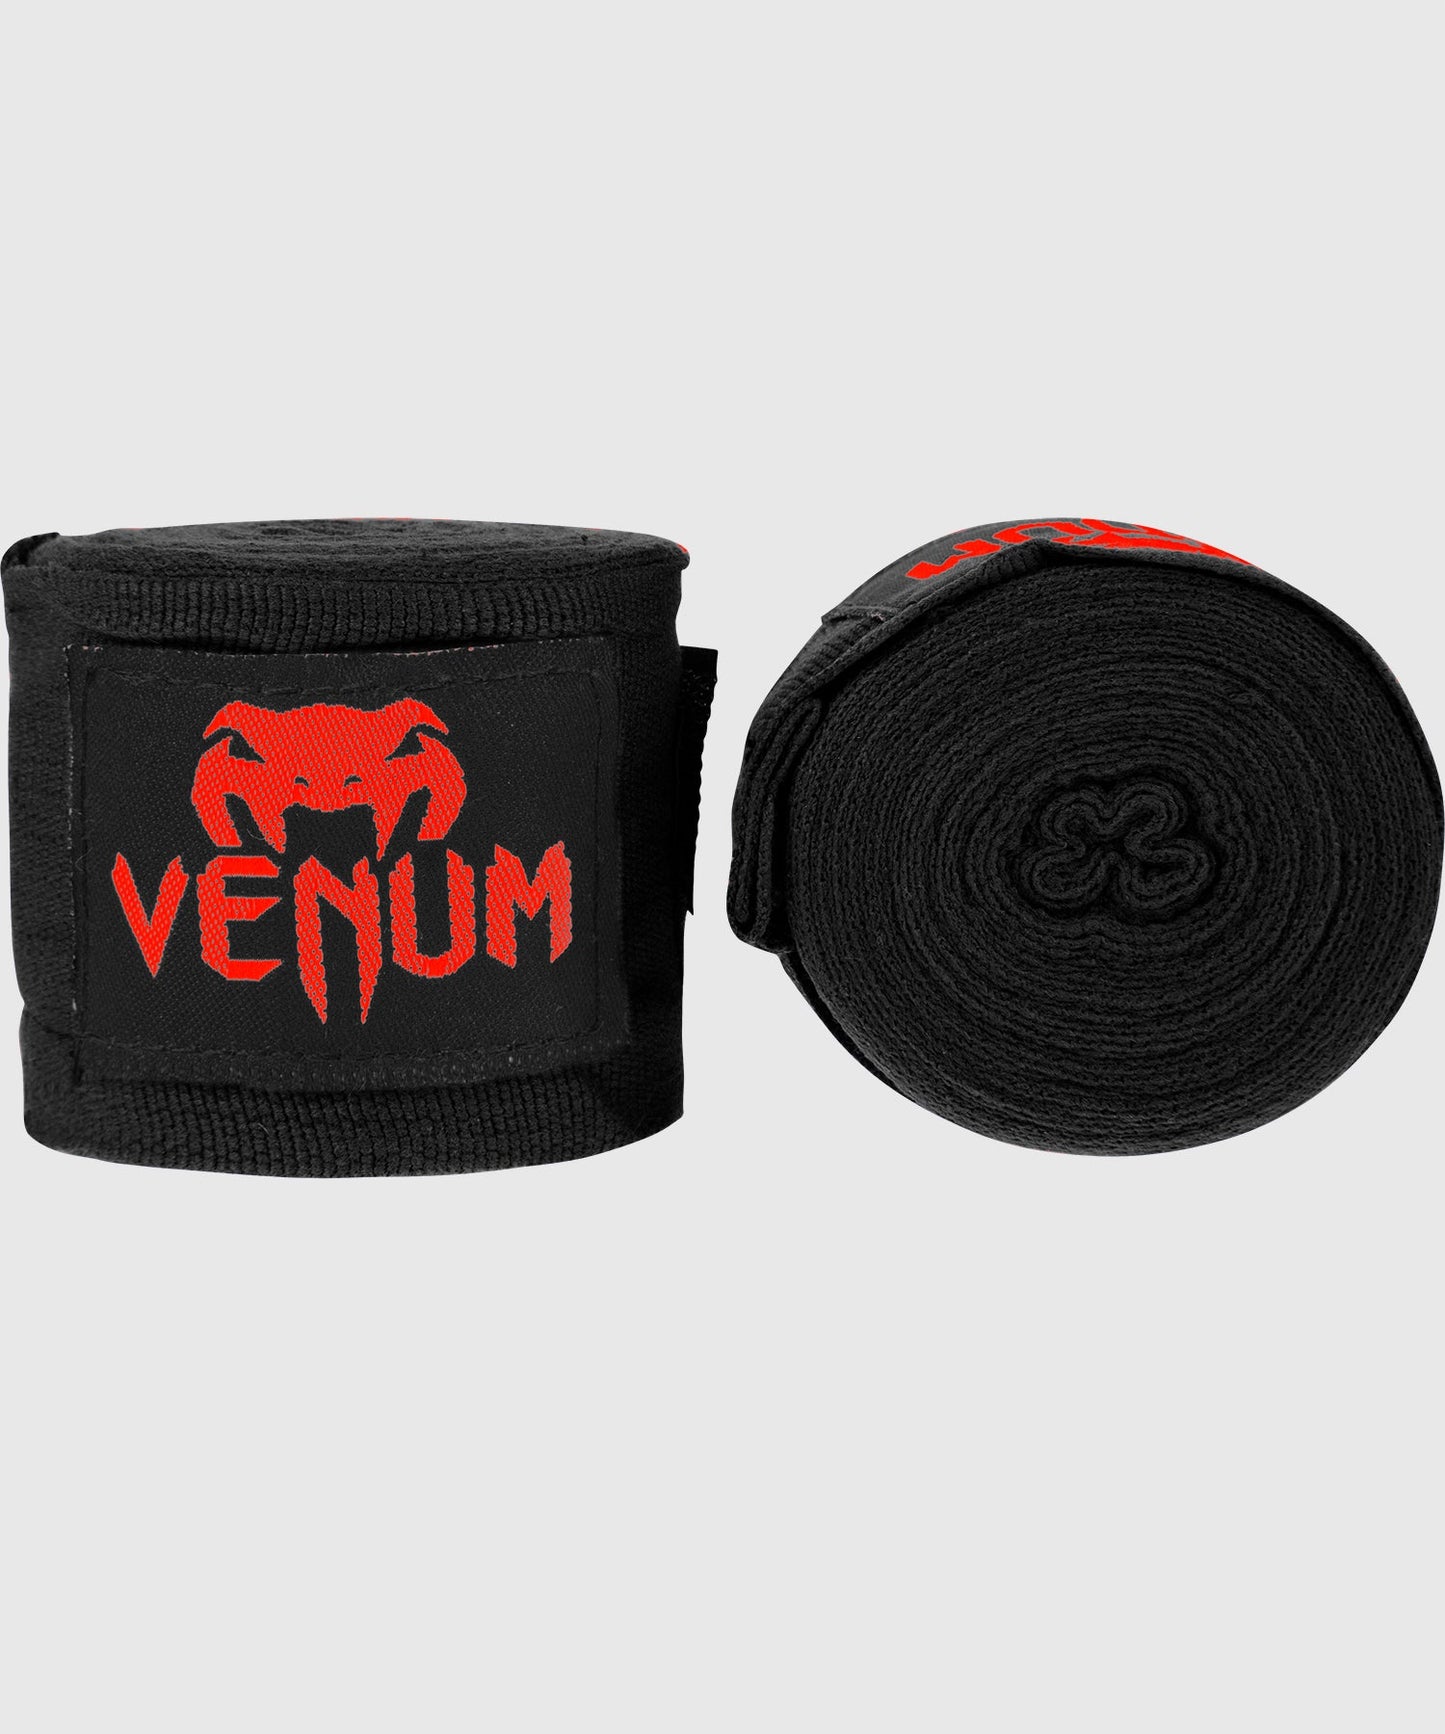 Venum Kontact Boxing Hand Wraps - Black/Red - 157 in